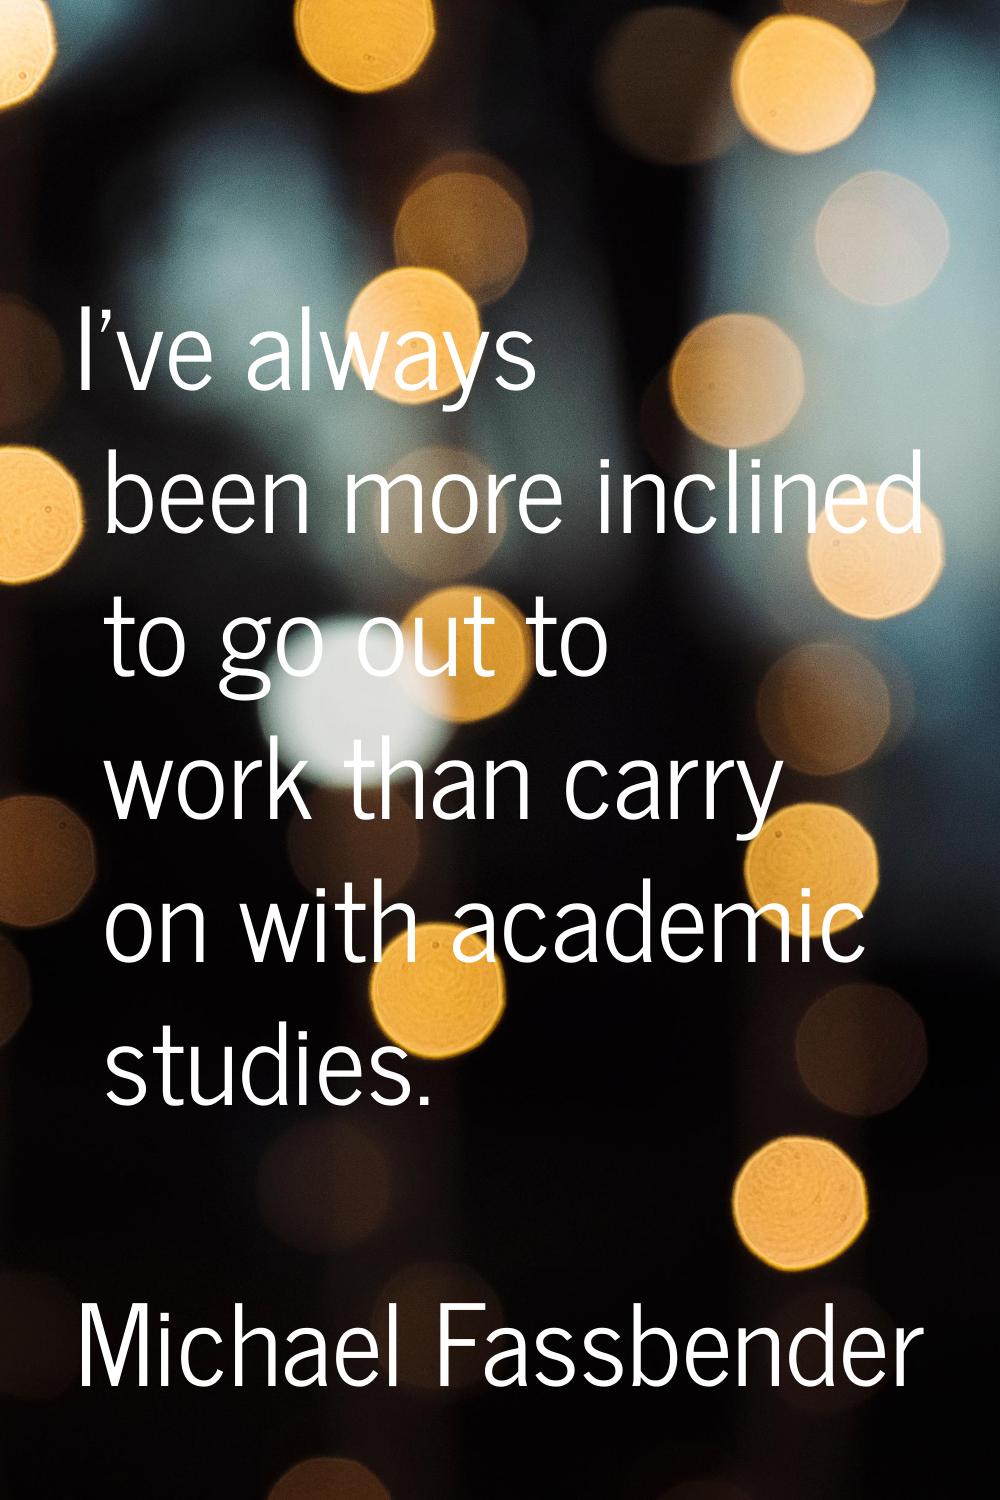 I've always been more inclined to go out to work than carry on with academic studies.